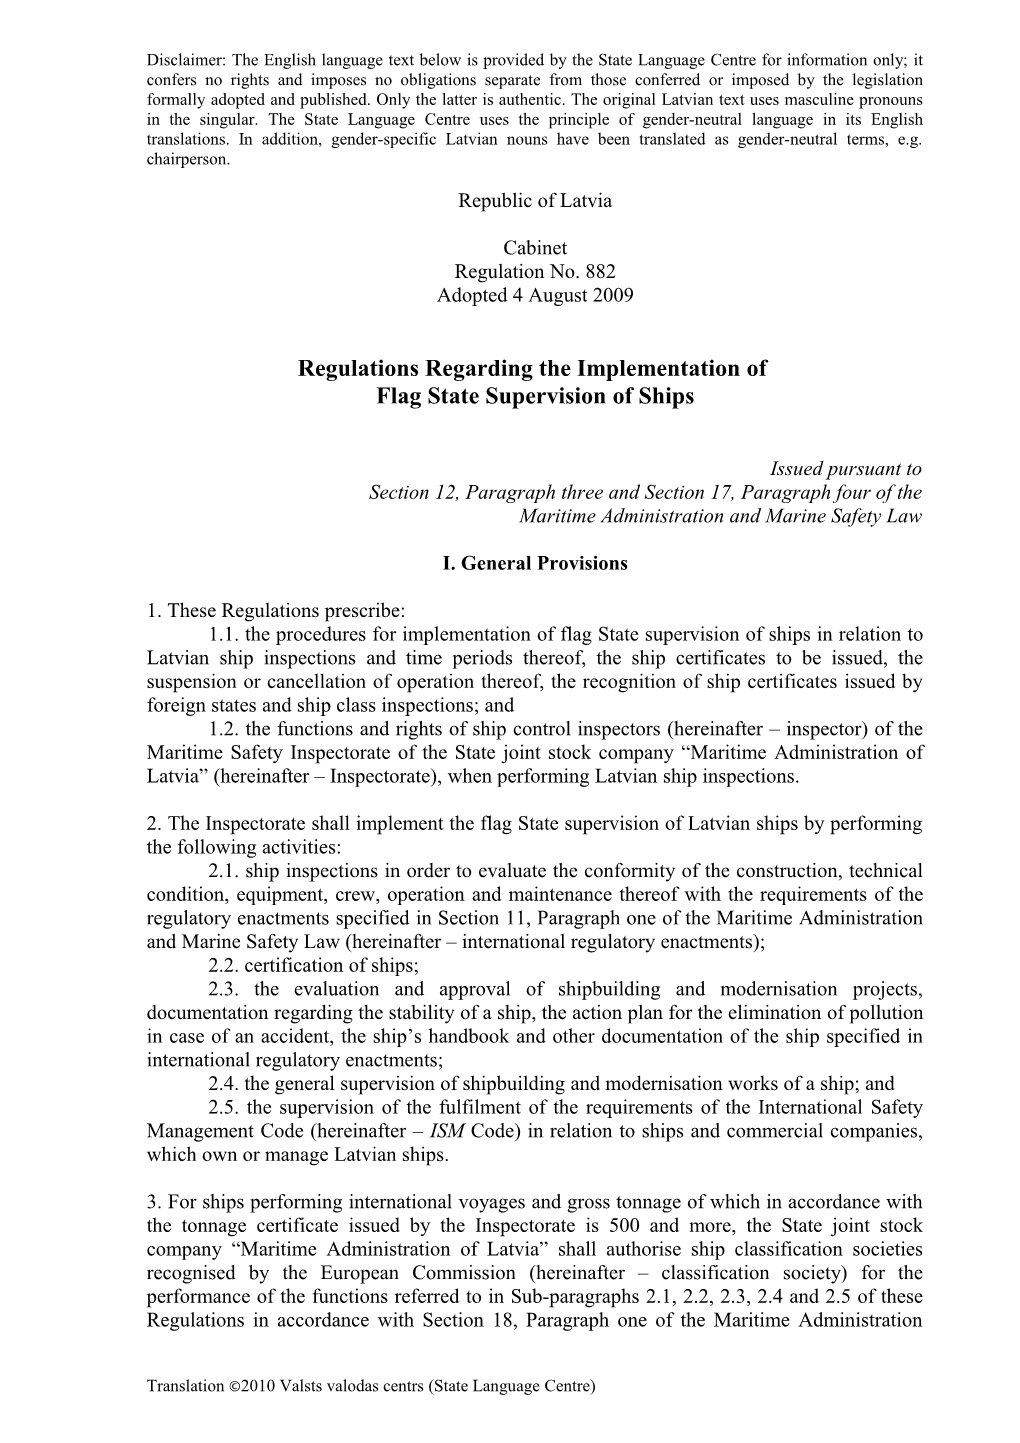 Regulations Regarding the Implementation of Flagstate Supervision of Ships